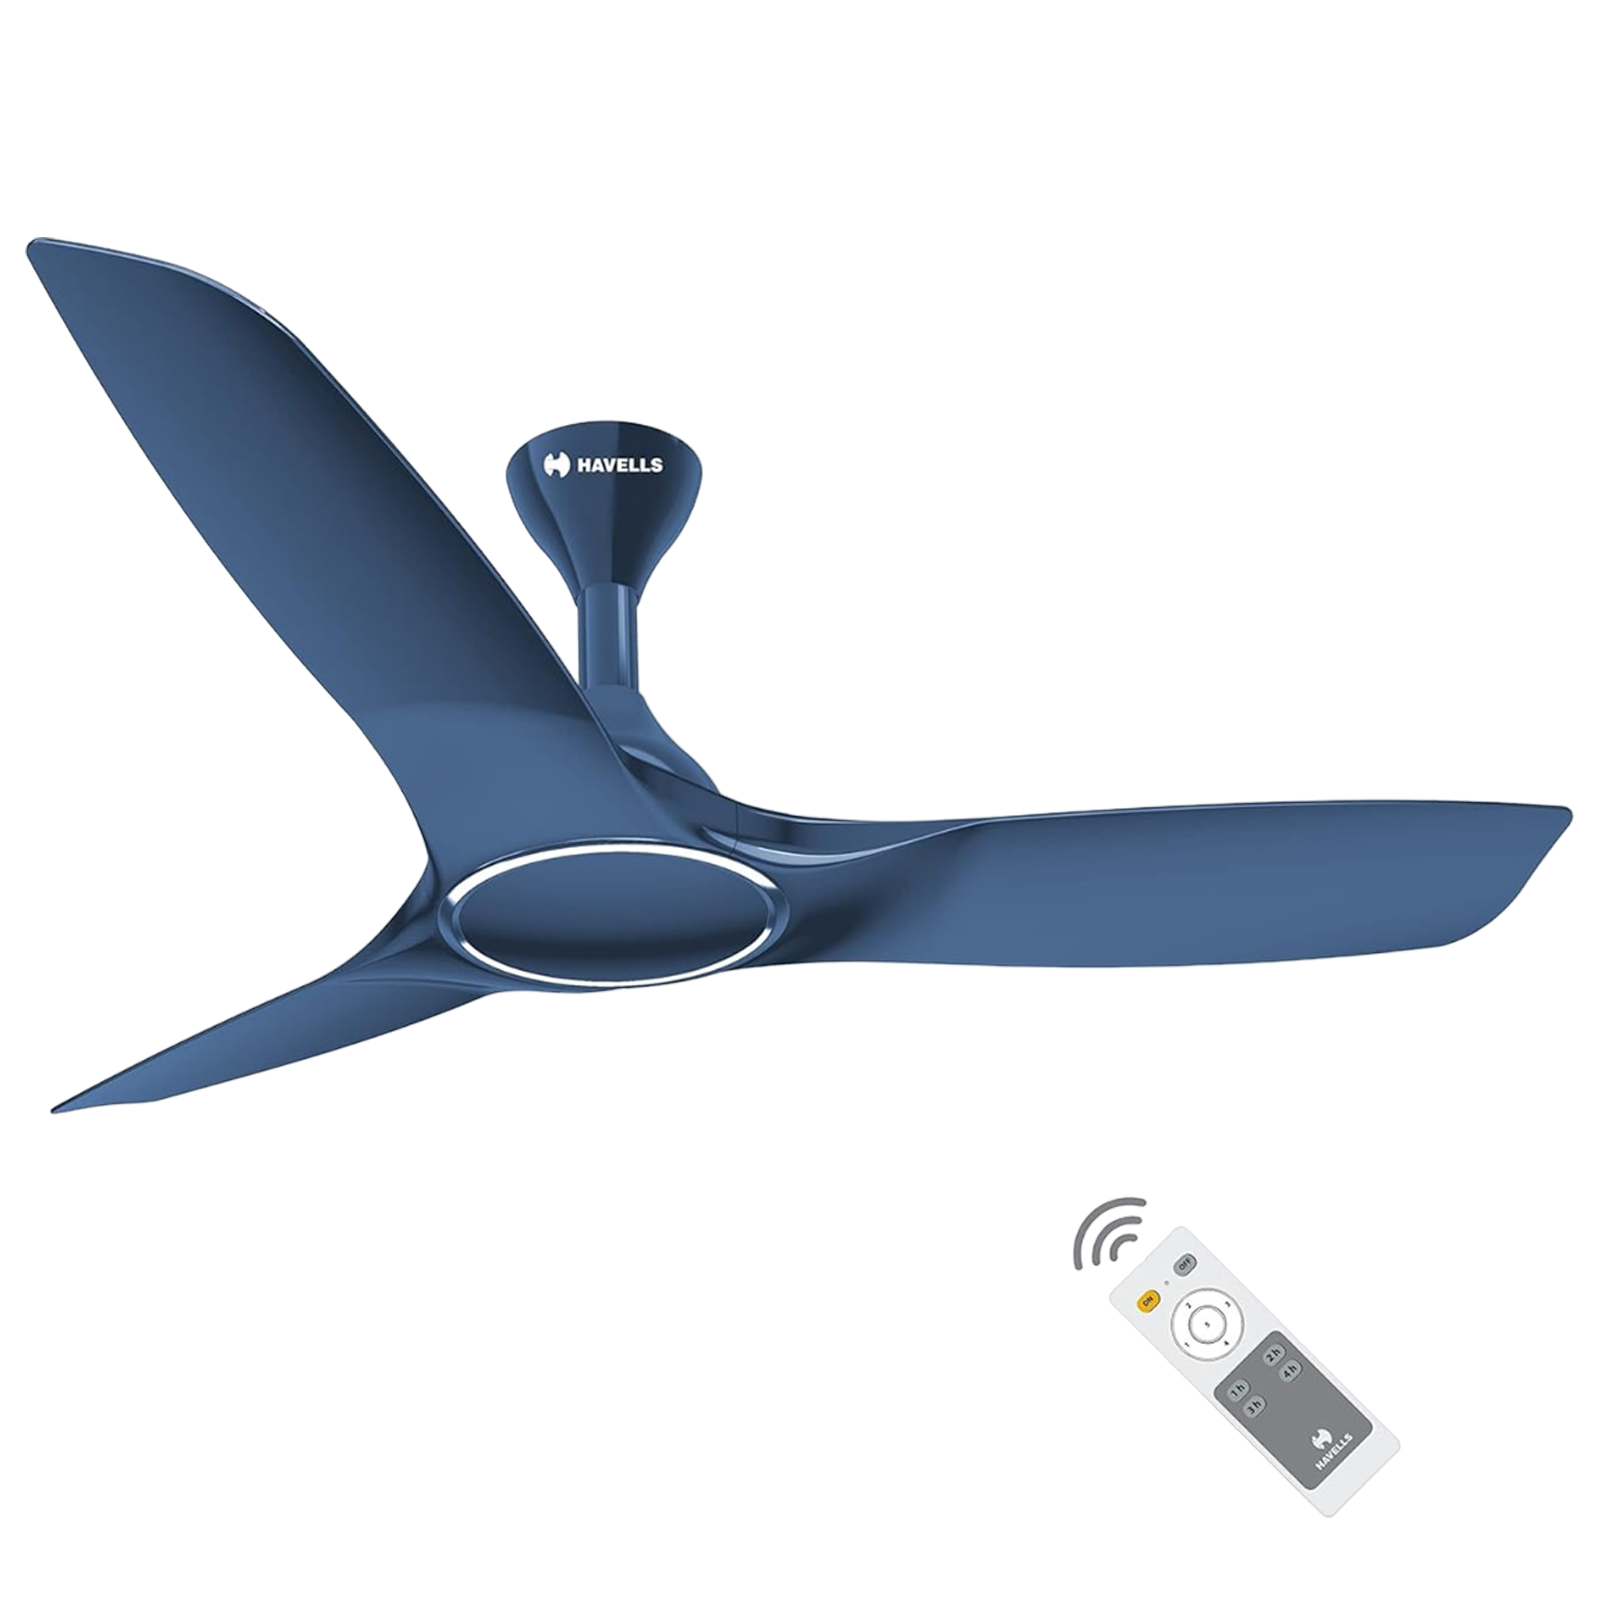 HAVELLS Stealth Air 5 Star 1200mm 3 Blade BLDC Motor Ceiling Fan with Remote (Inverter Technology, Indigo Blue)